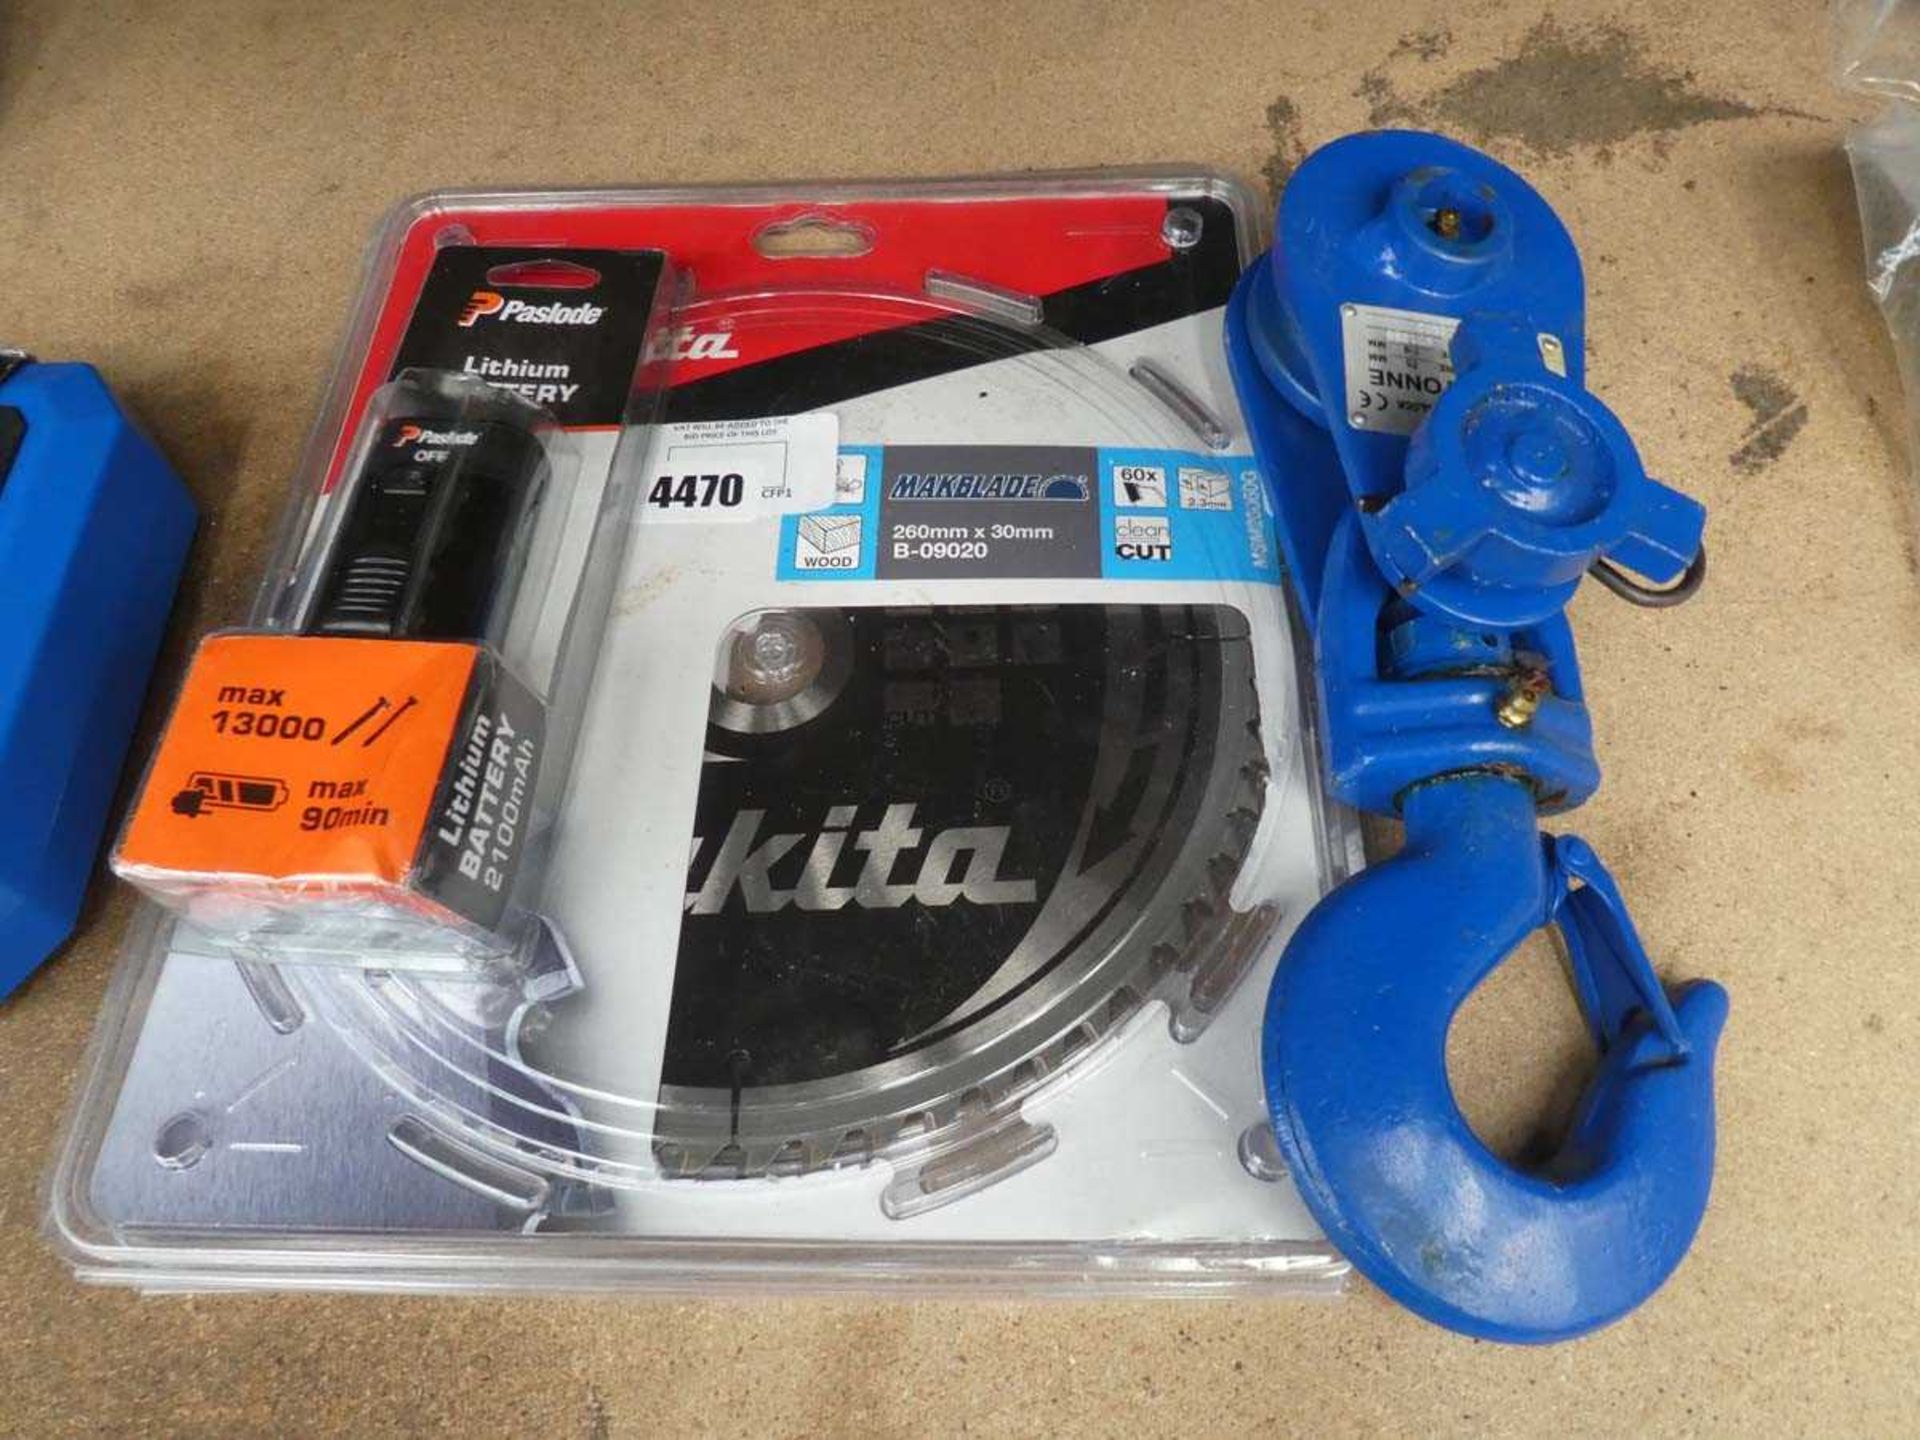 +VAT Paslode battery, Makita saw blade and a large shackle